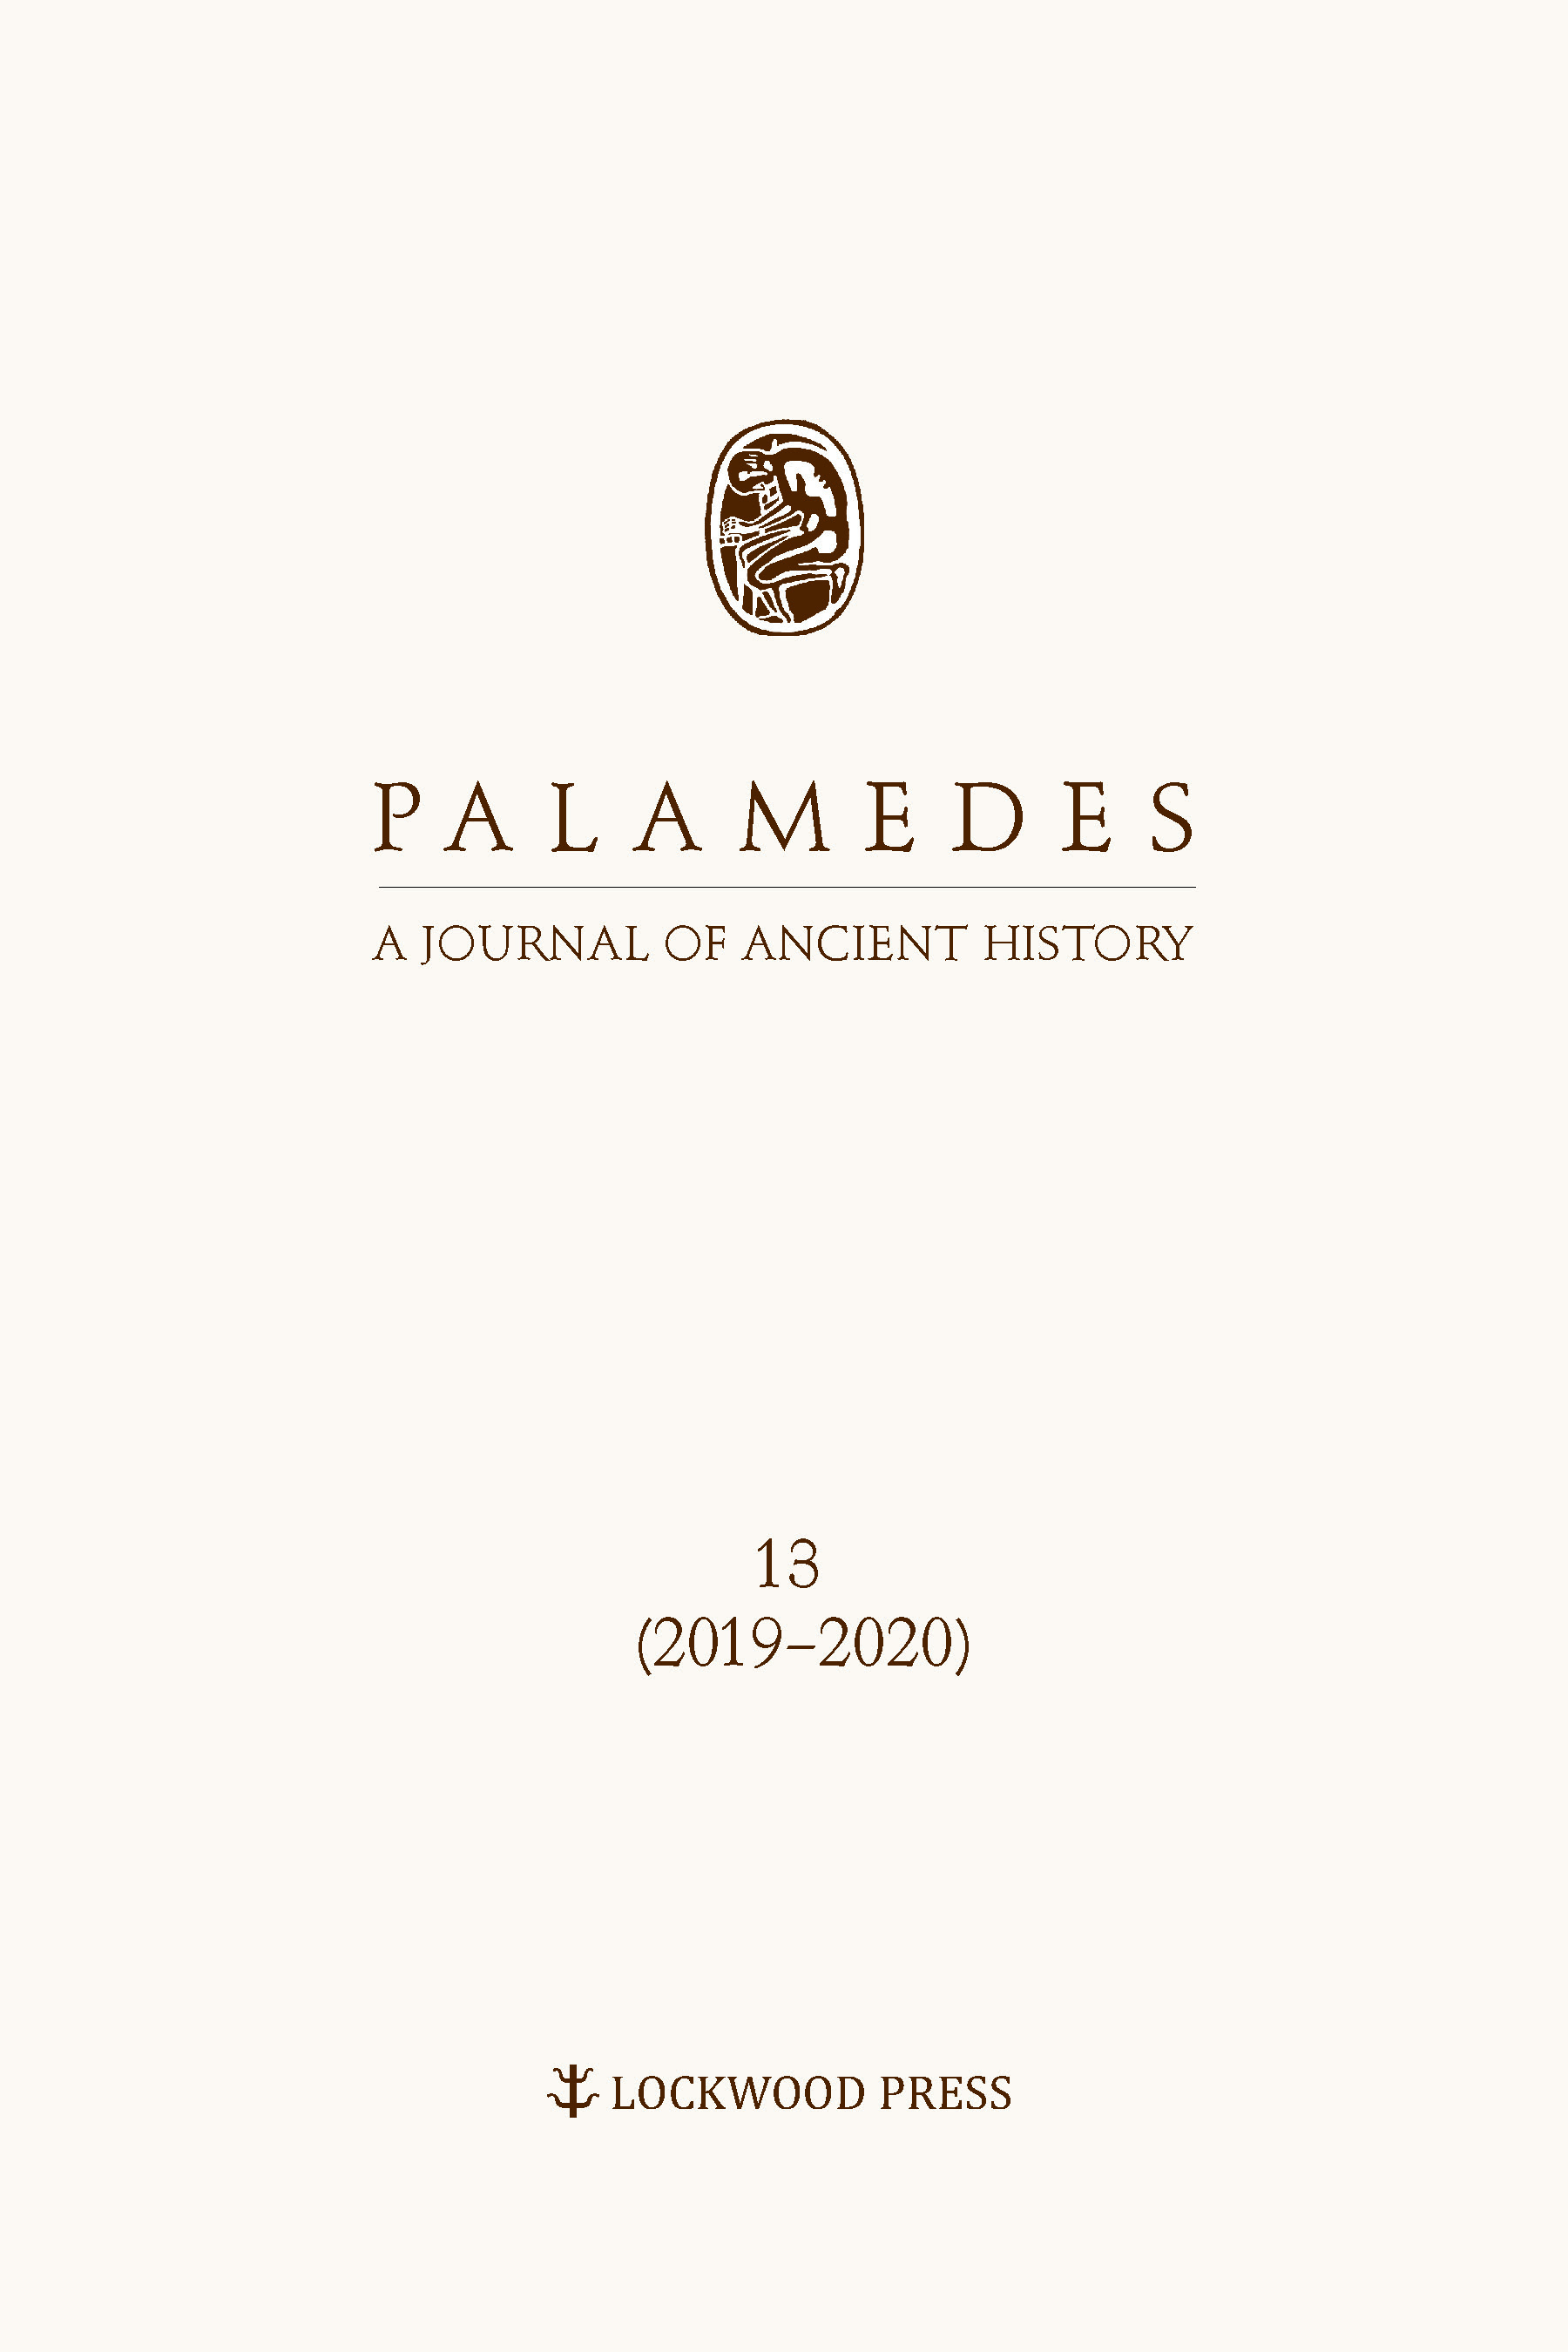 Cover for Palamedes 13 (2019–2020)